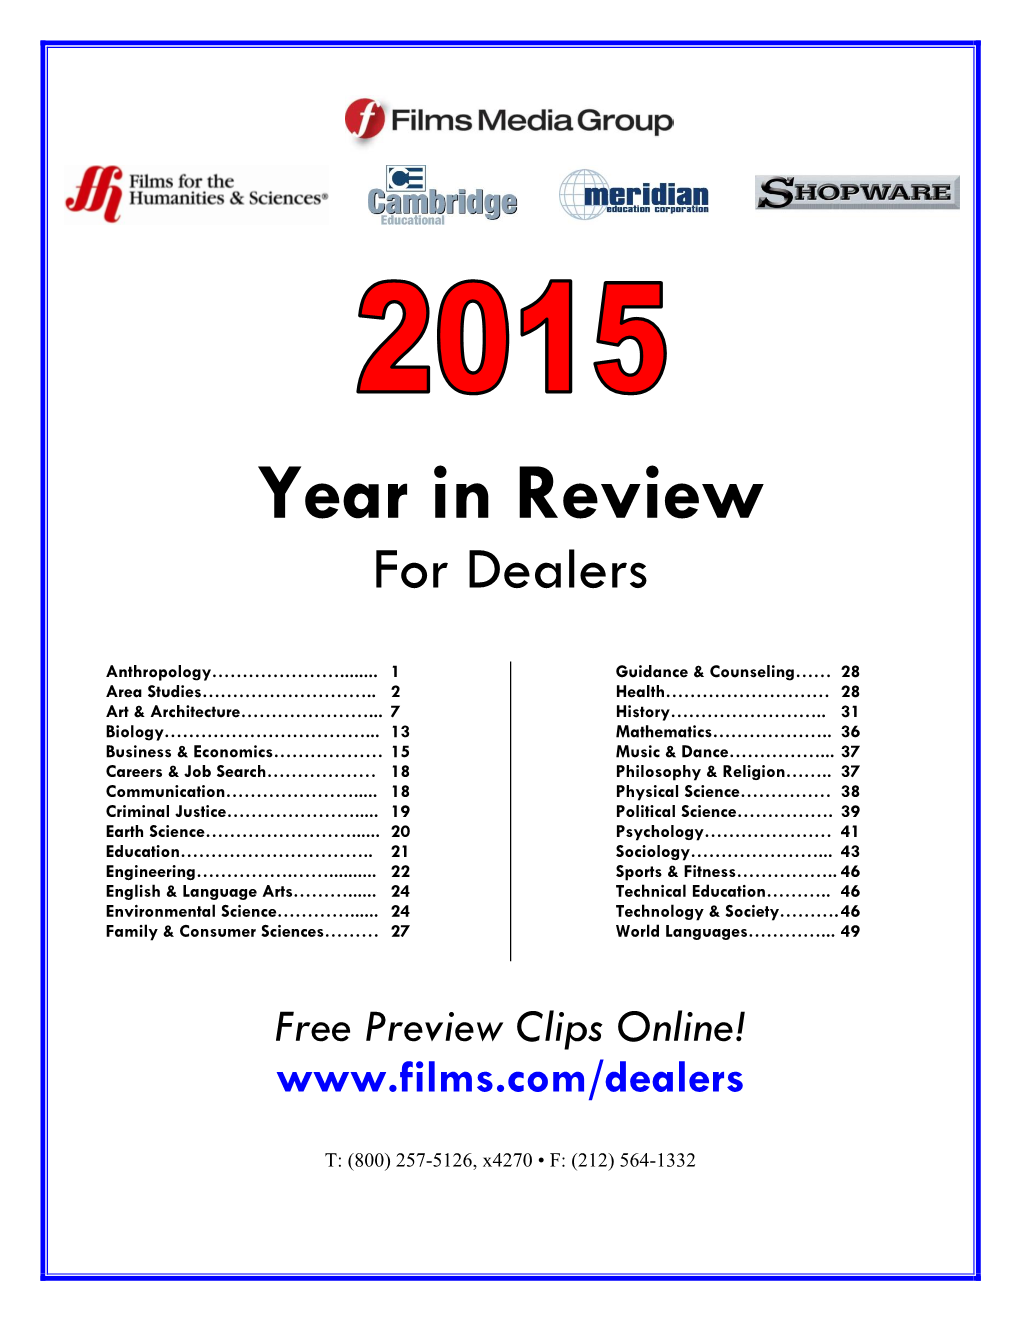 Year in Review for Dealers